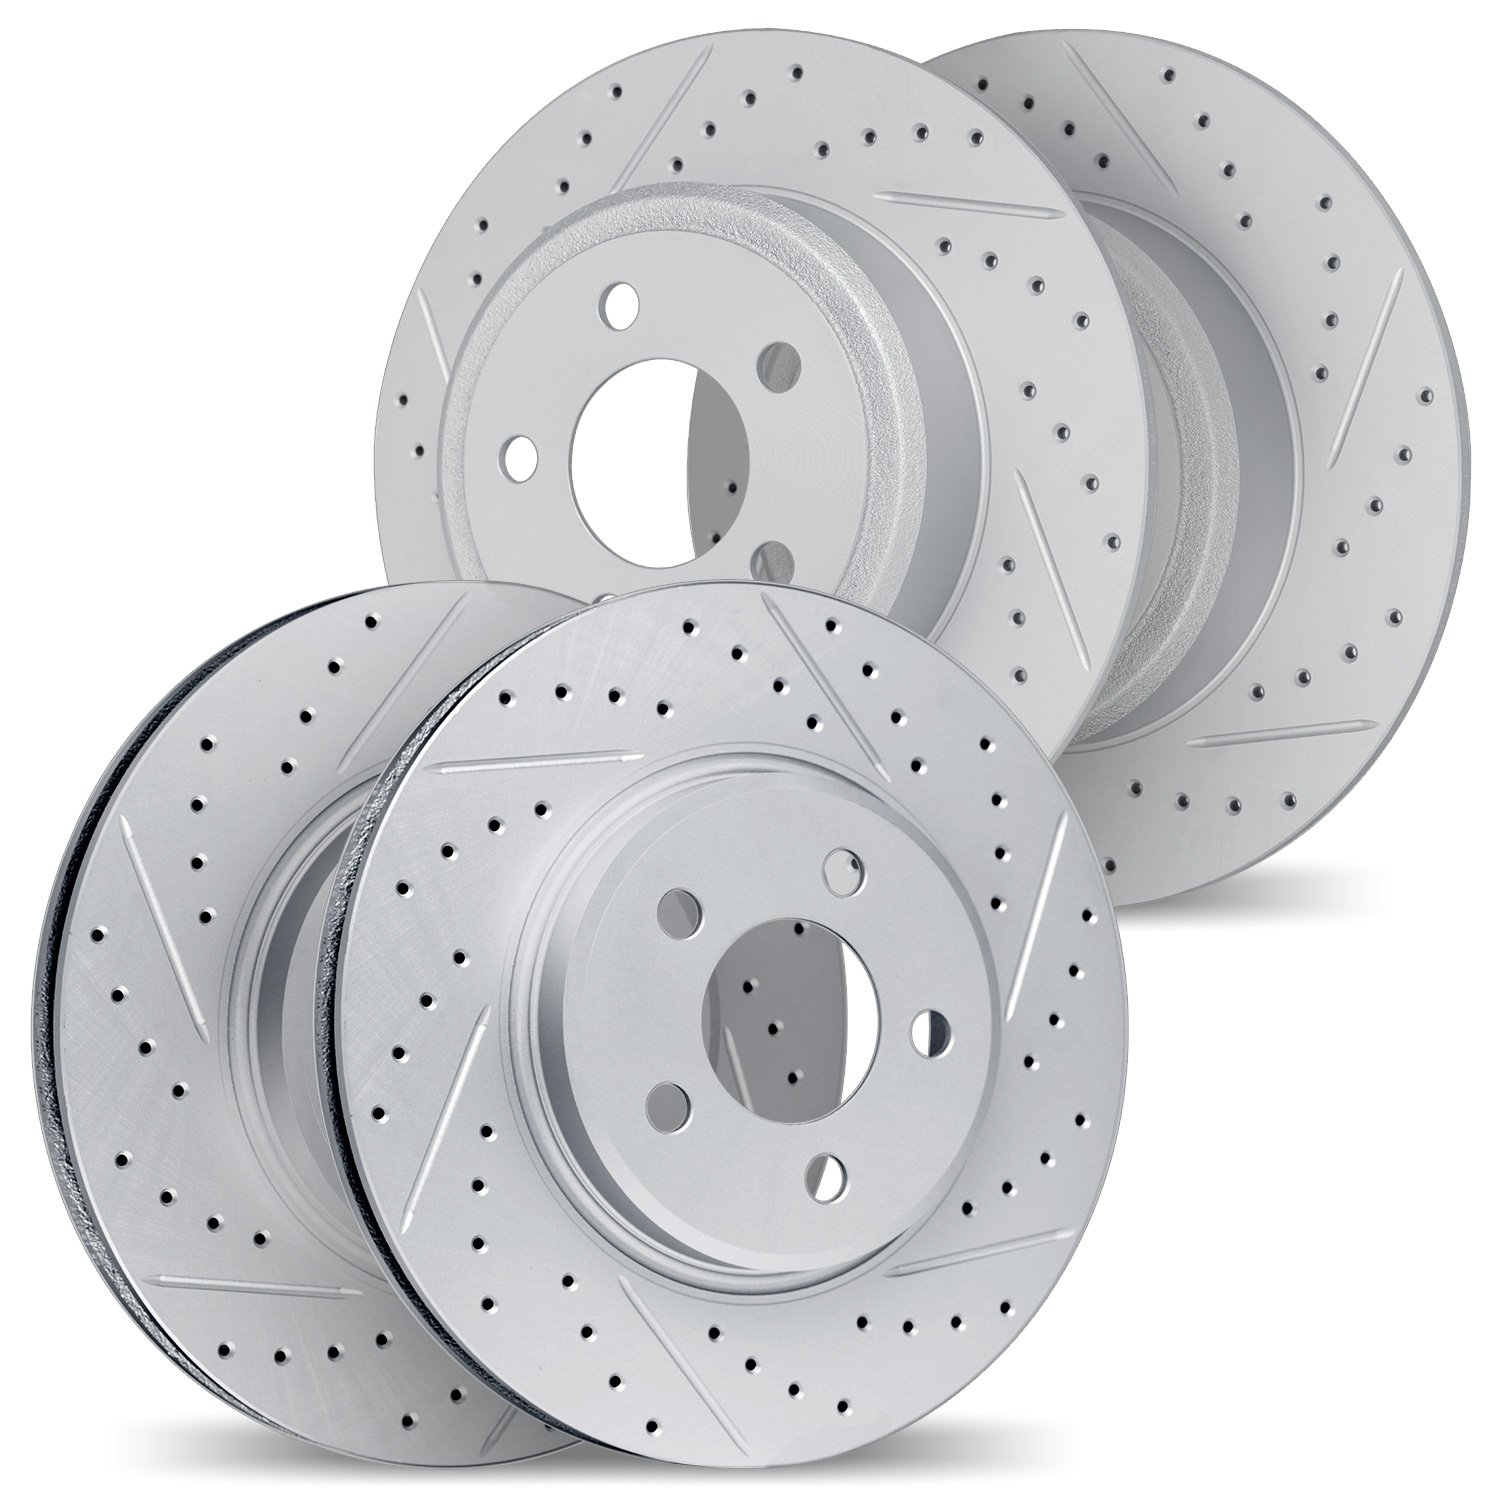 2004-45035 Geoperformance Drilled/Slotted Brake Rotors, 2004-2005 GM, Position: Front and Rear